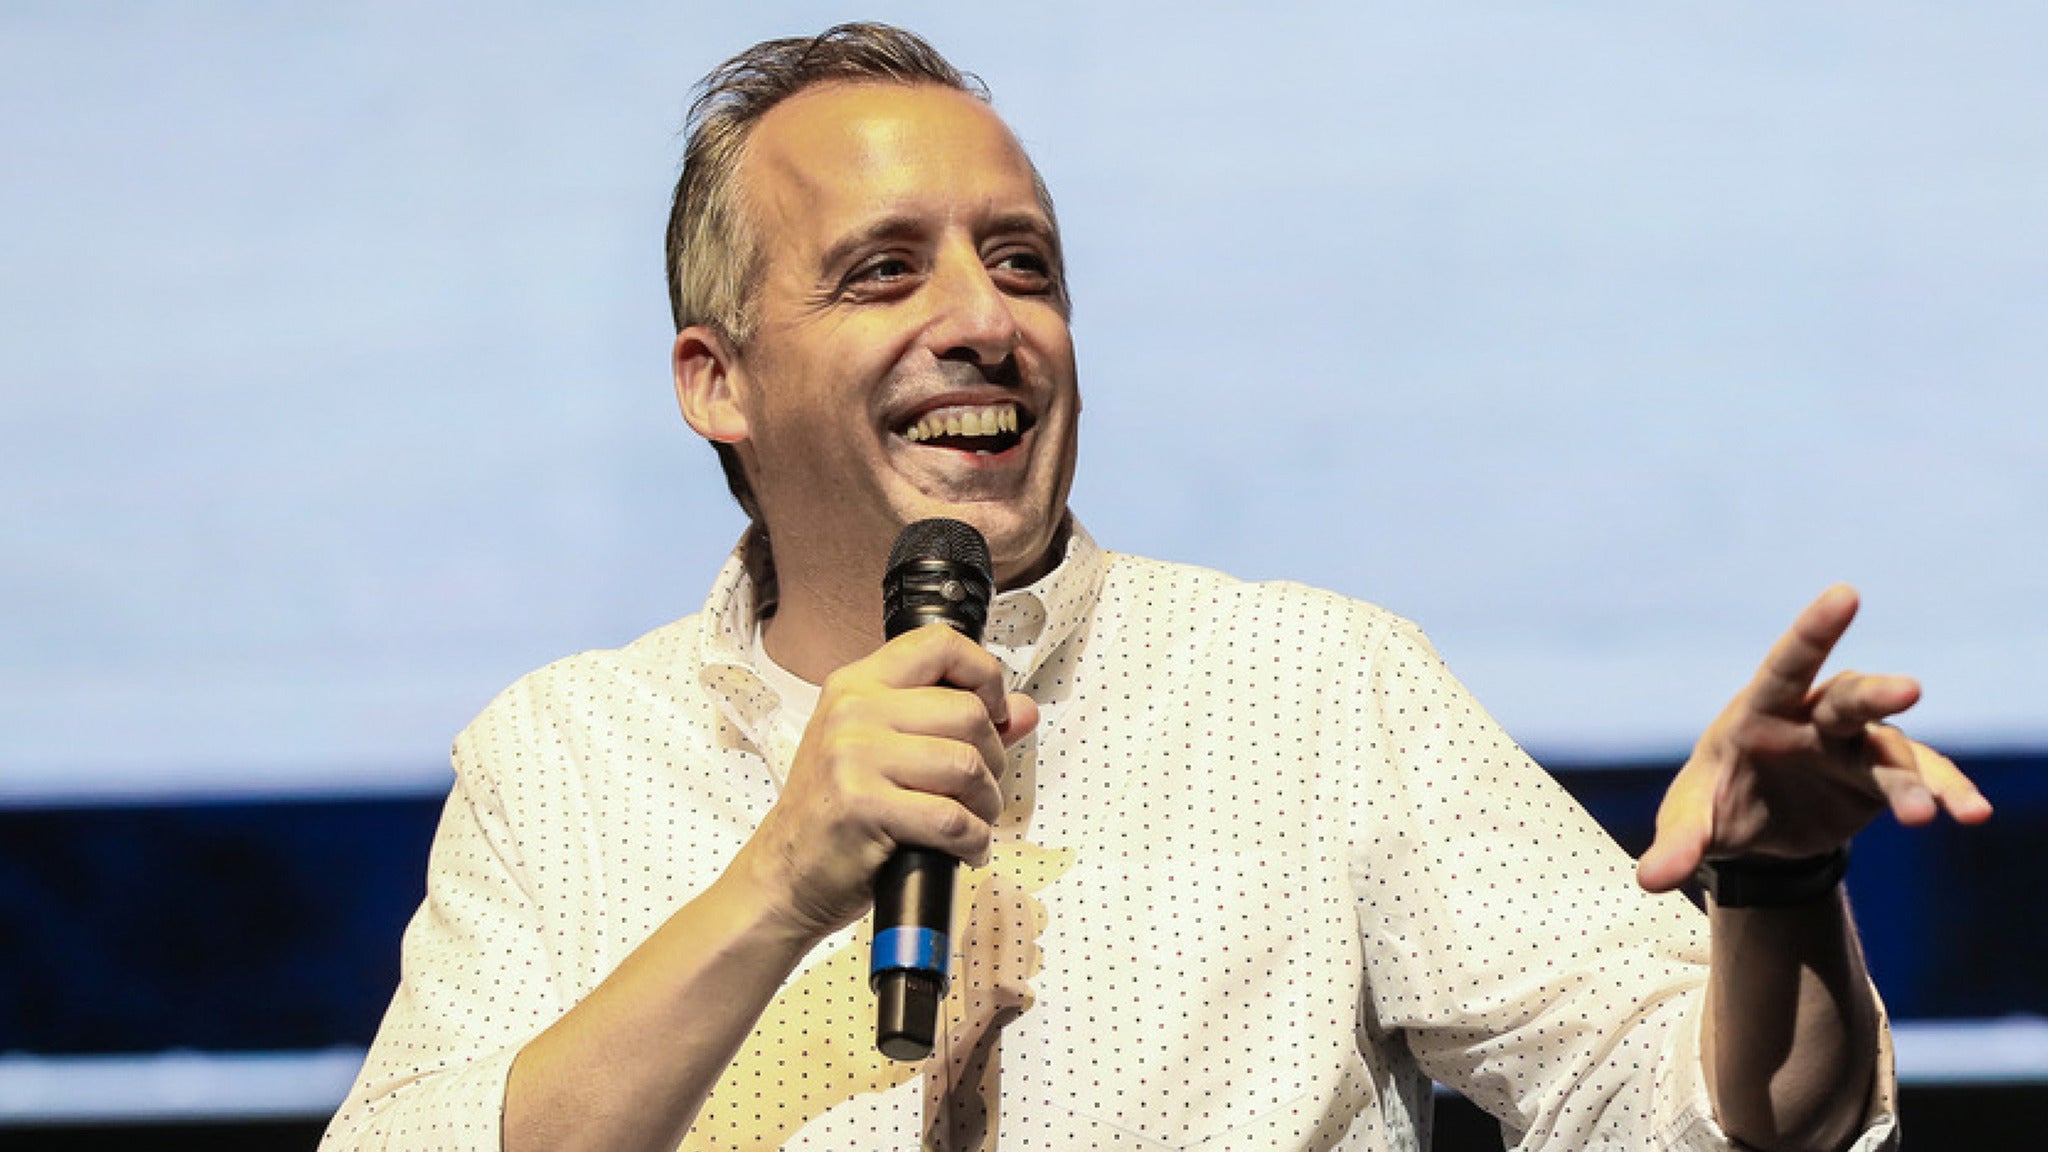 Joe Gatto's Night Of Comedy at HOYT SHERMAN PLACE